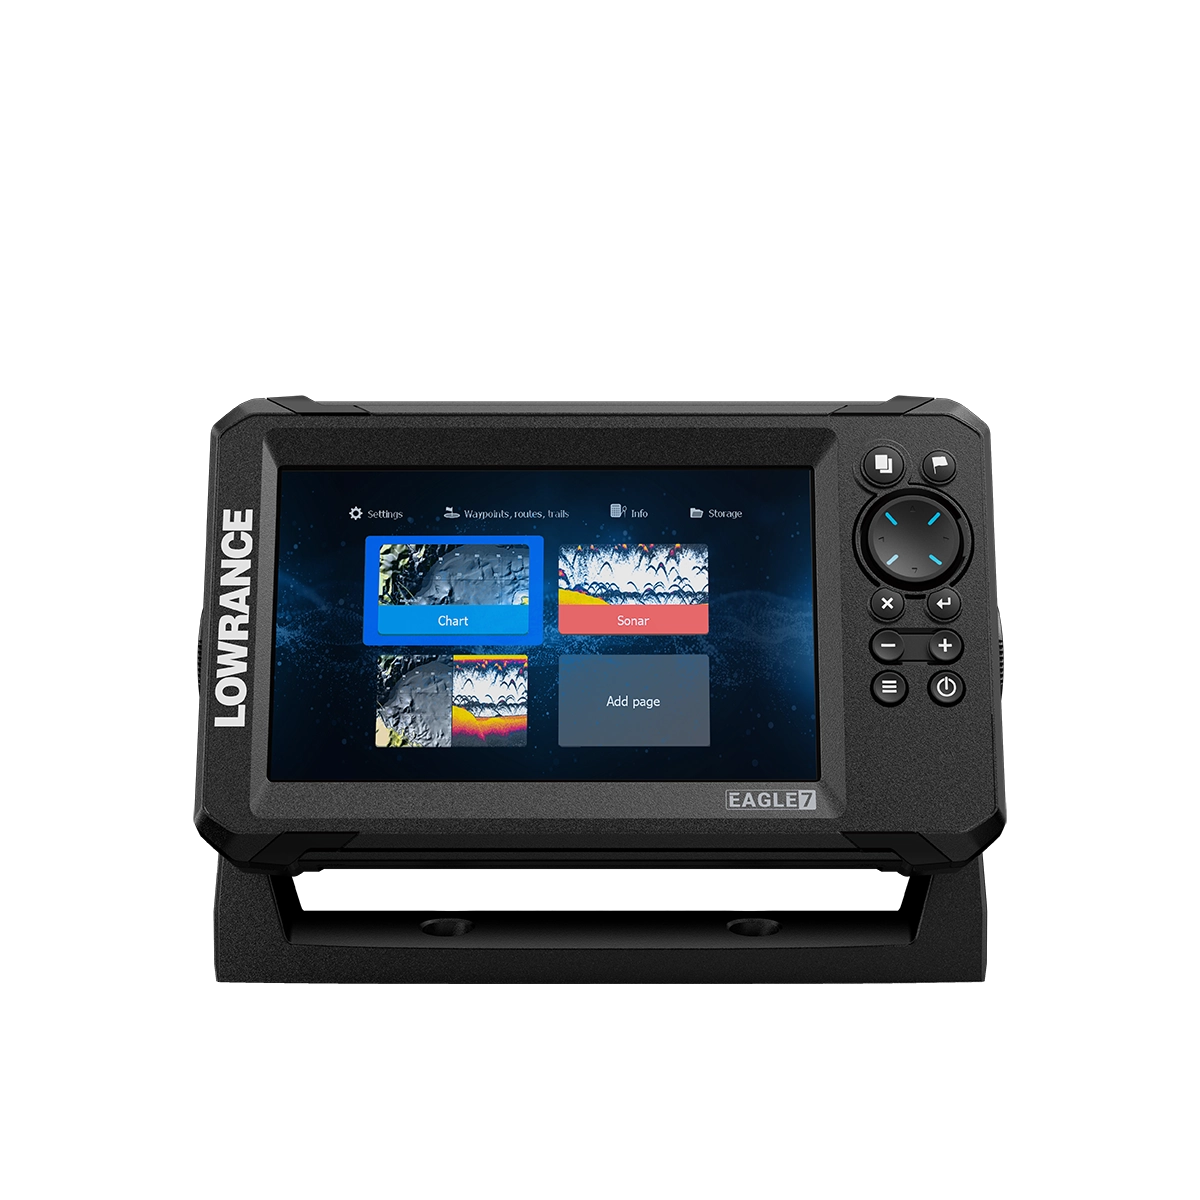 Lowrance EAGLE 7 TripleShot HD with C-MAP (000-16228-001) - GPS Central